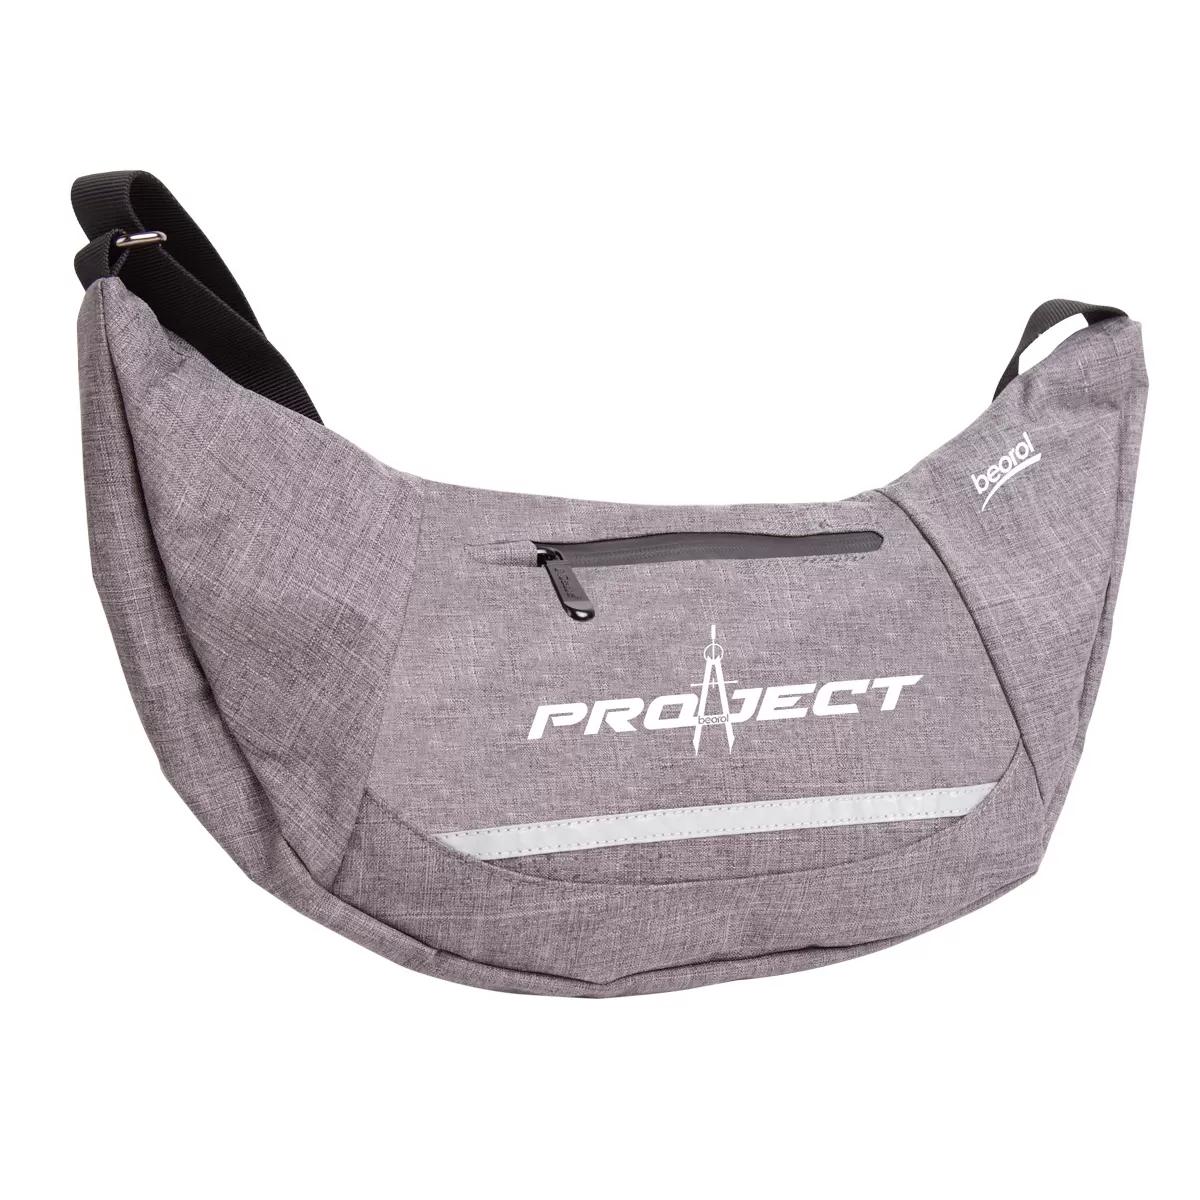 PROJECT crossover bag 